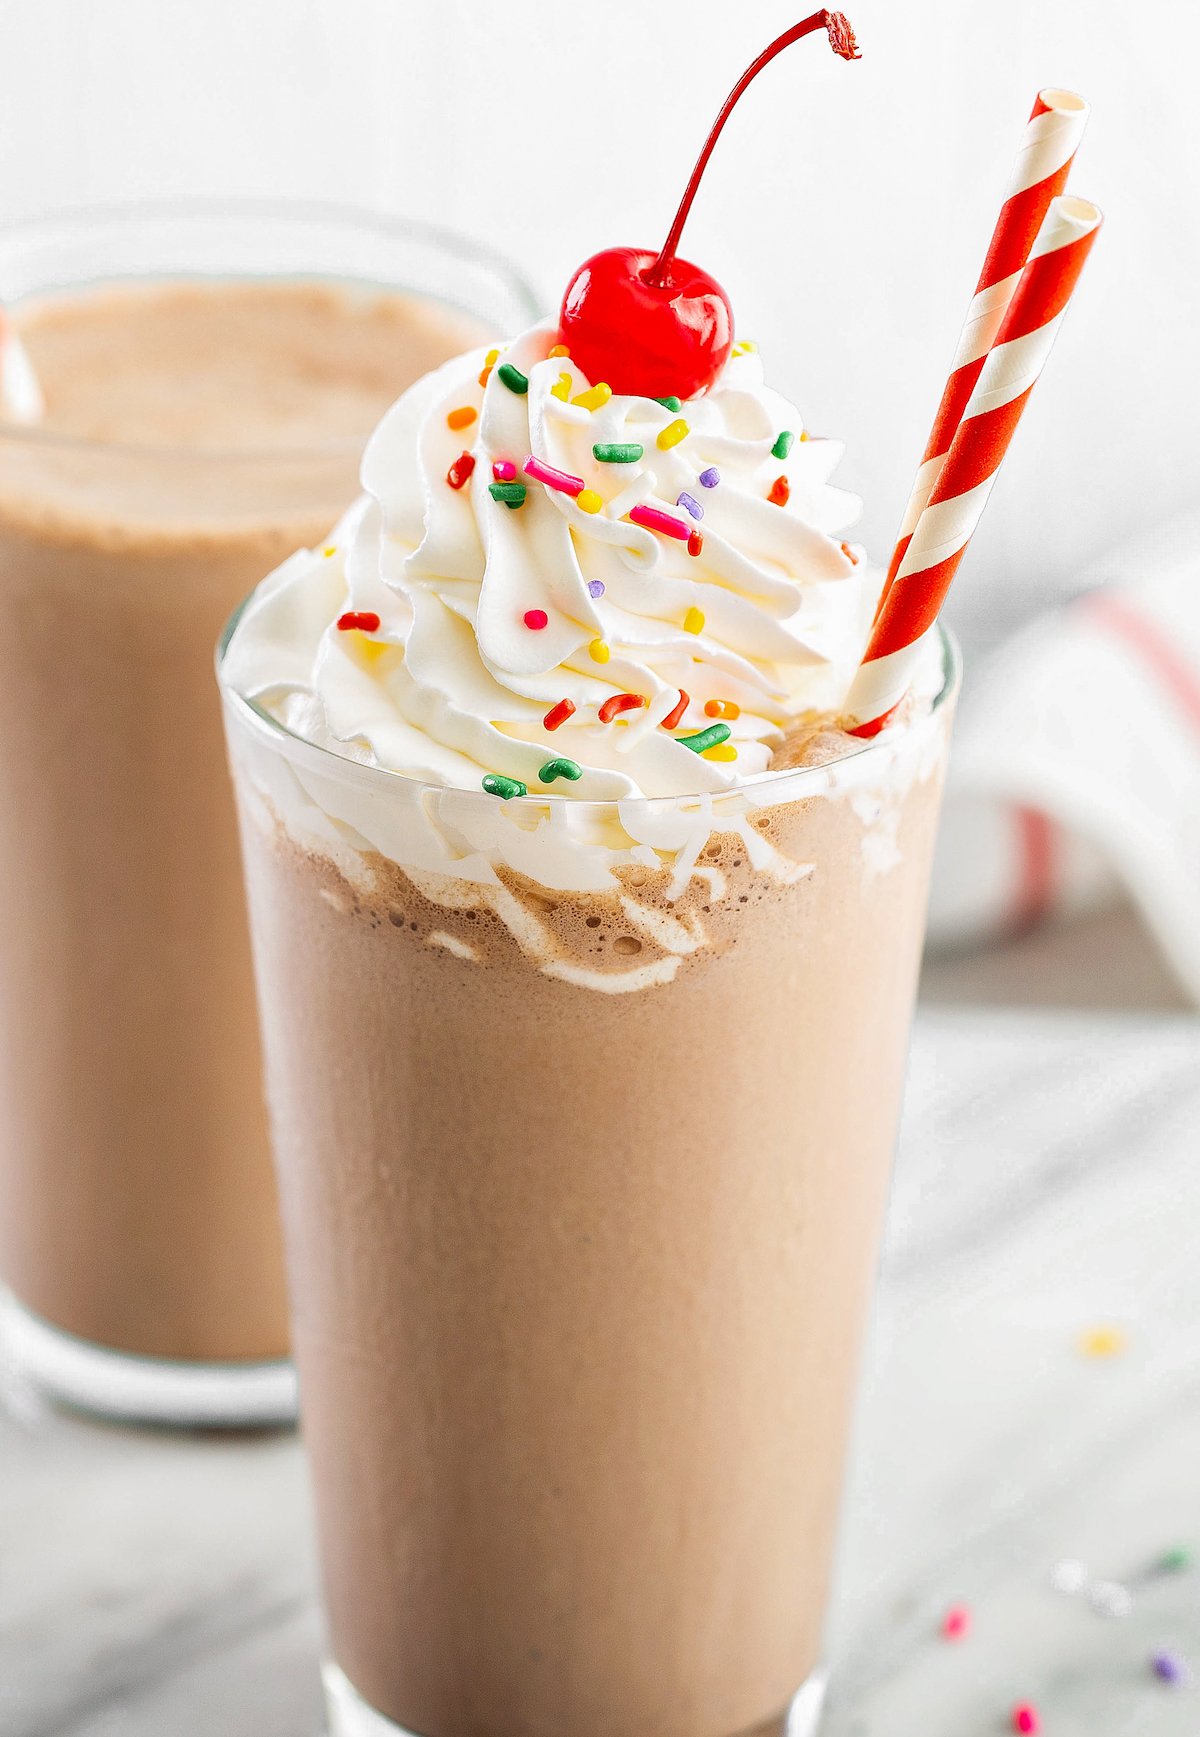 A chocolate milkshake with whipped cream, sprinkles, and a cherry.